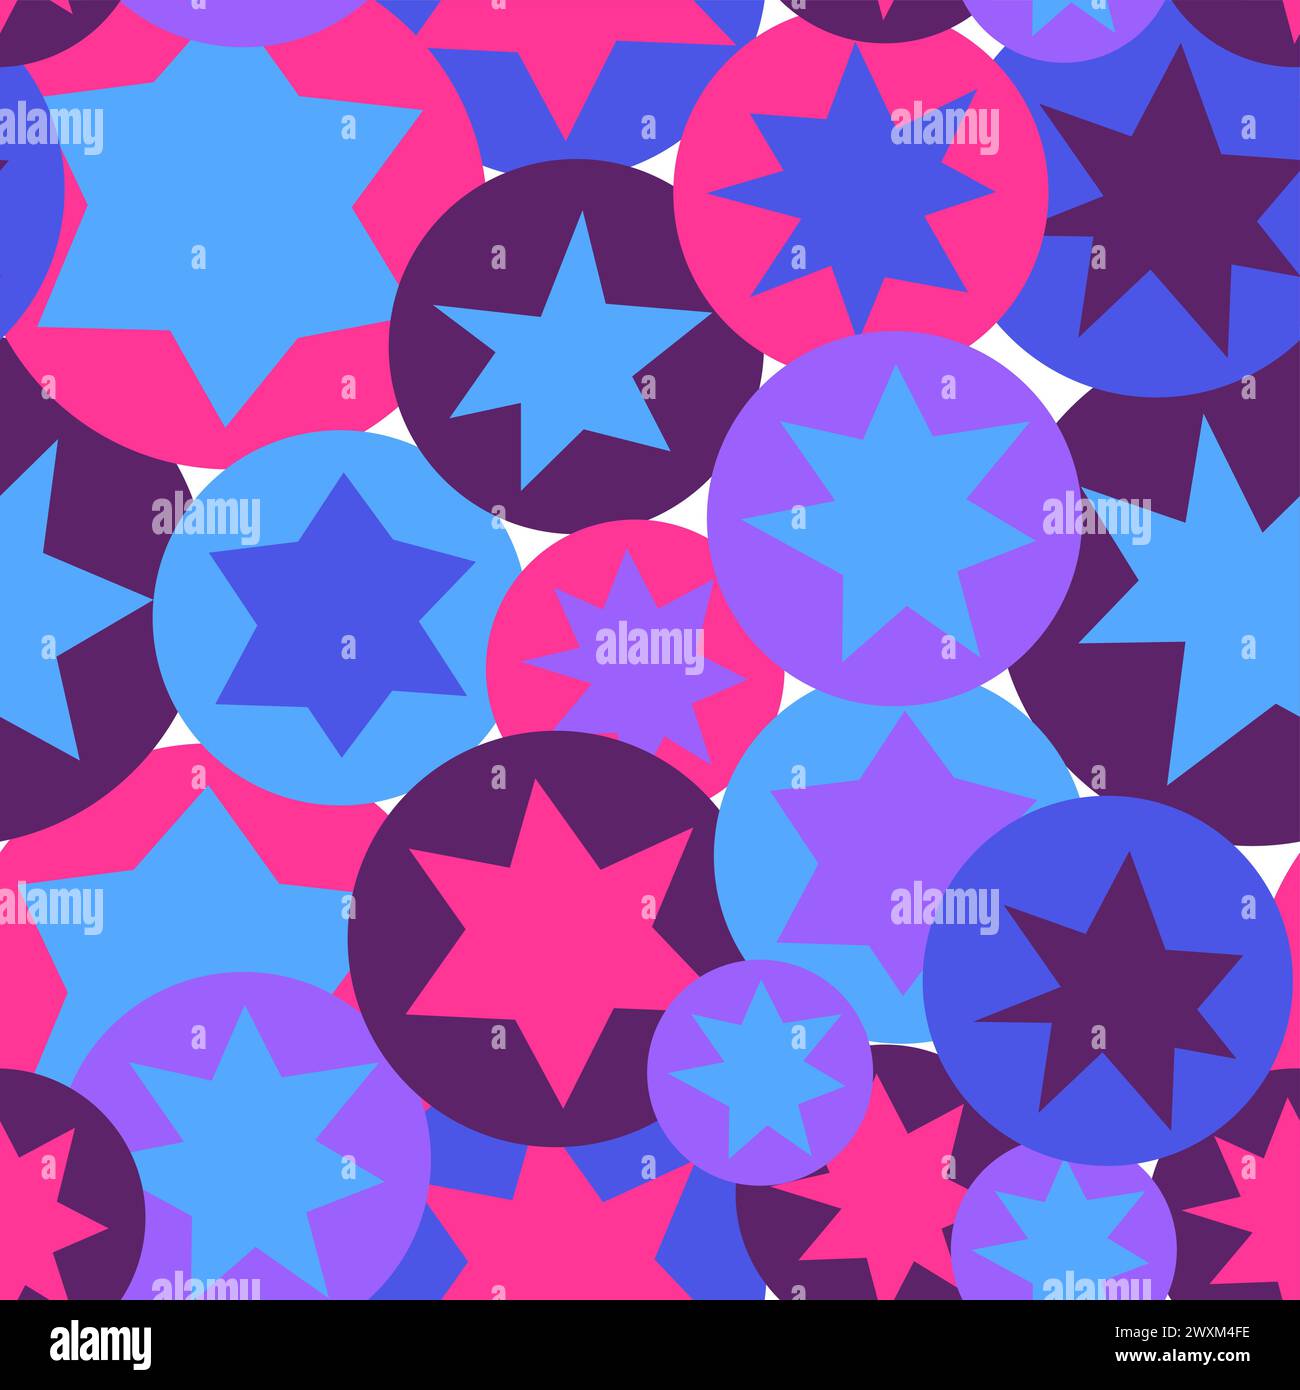 Abstract stars and circles seamless pattern. Violet, pink and blue colors. Stock Vector